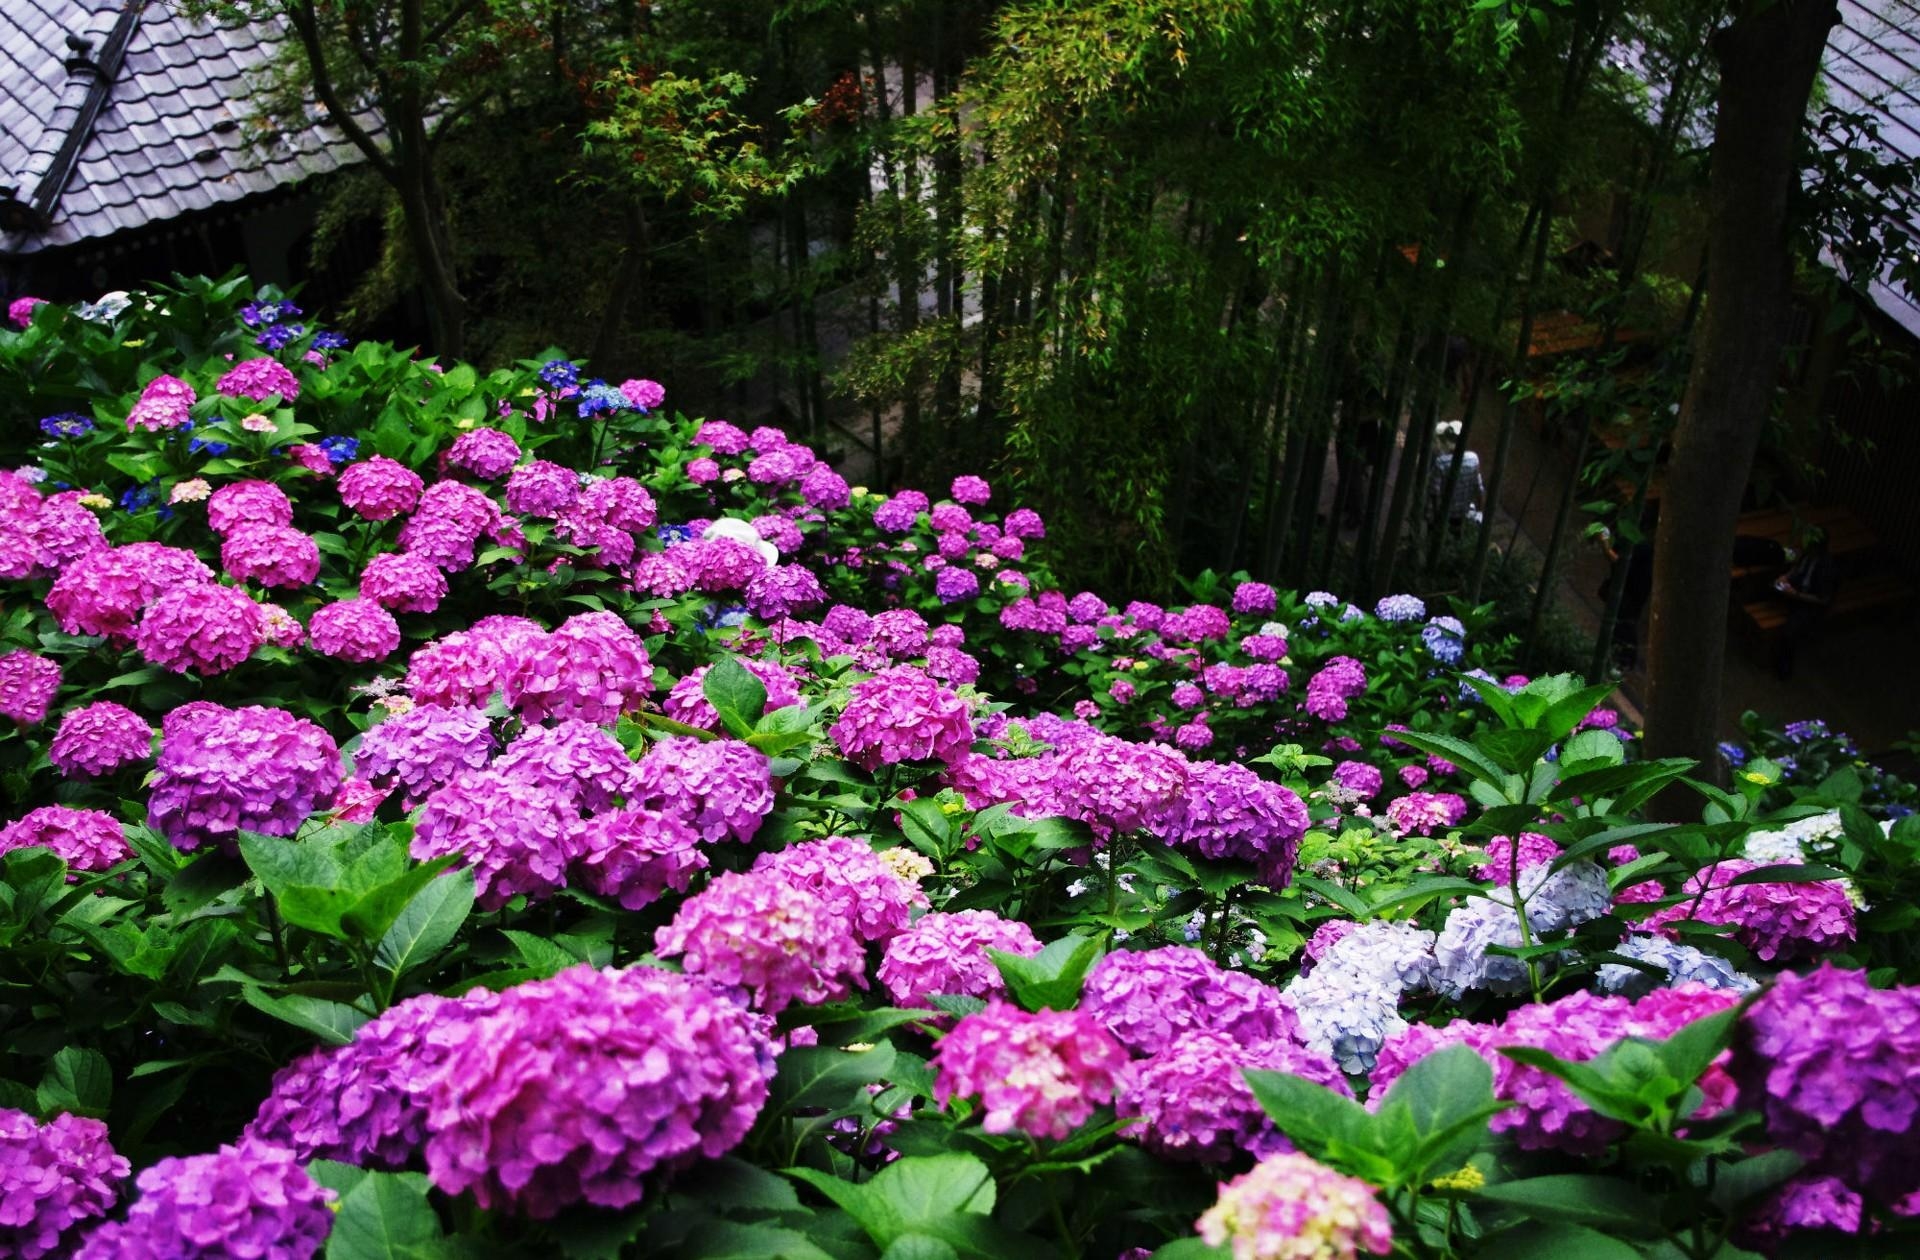 greens, hydrangea, flowers, park, slope, handsomely, it's beautiful